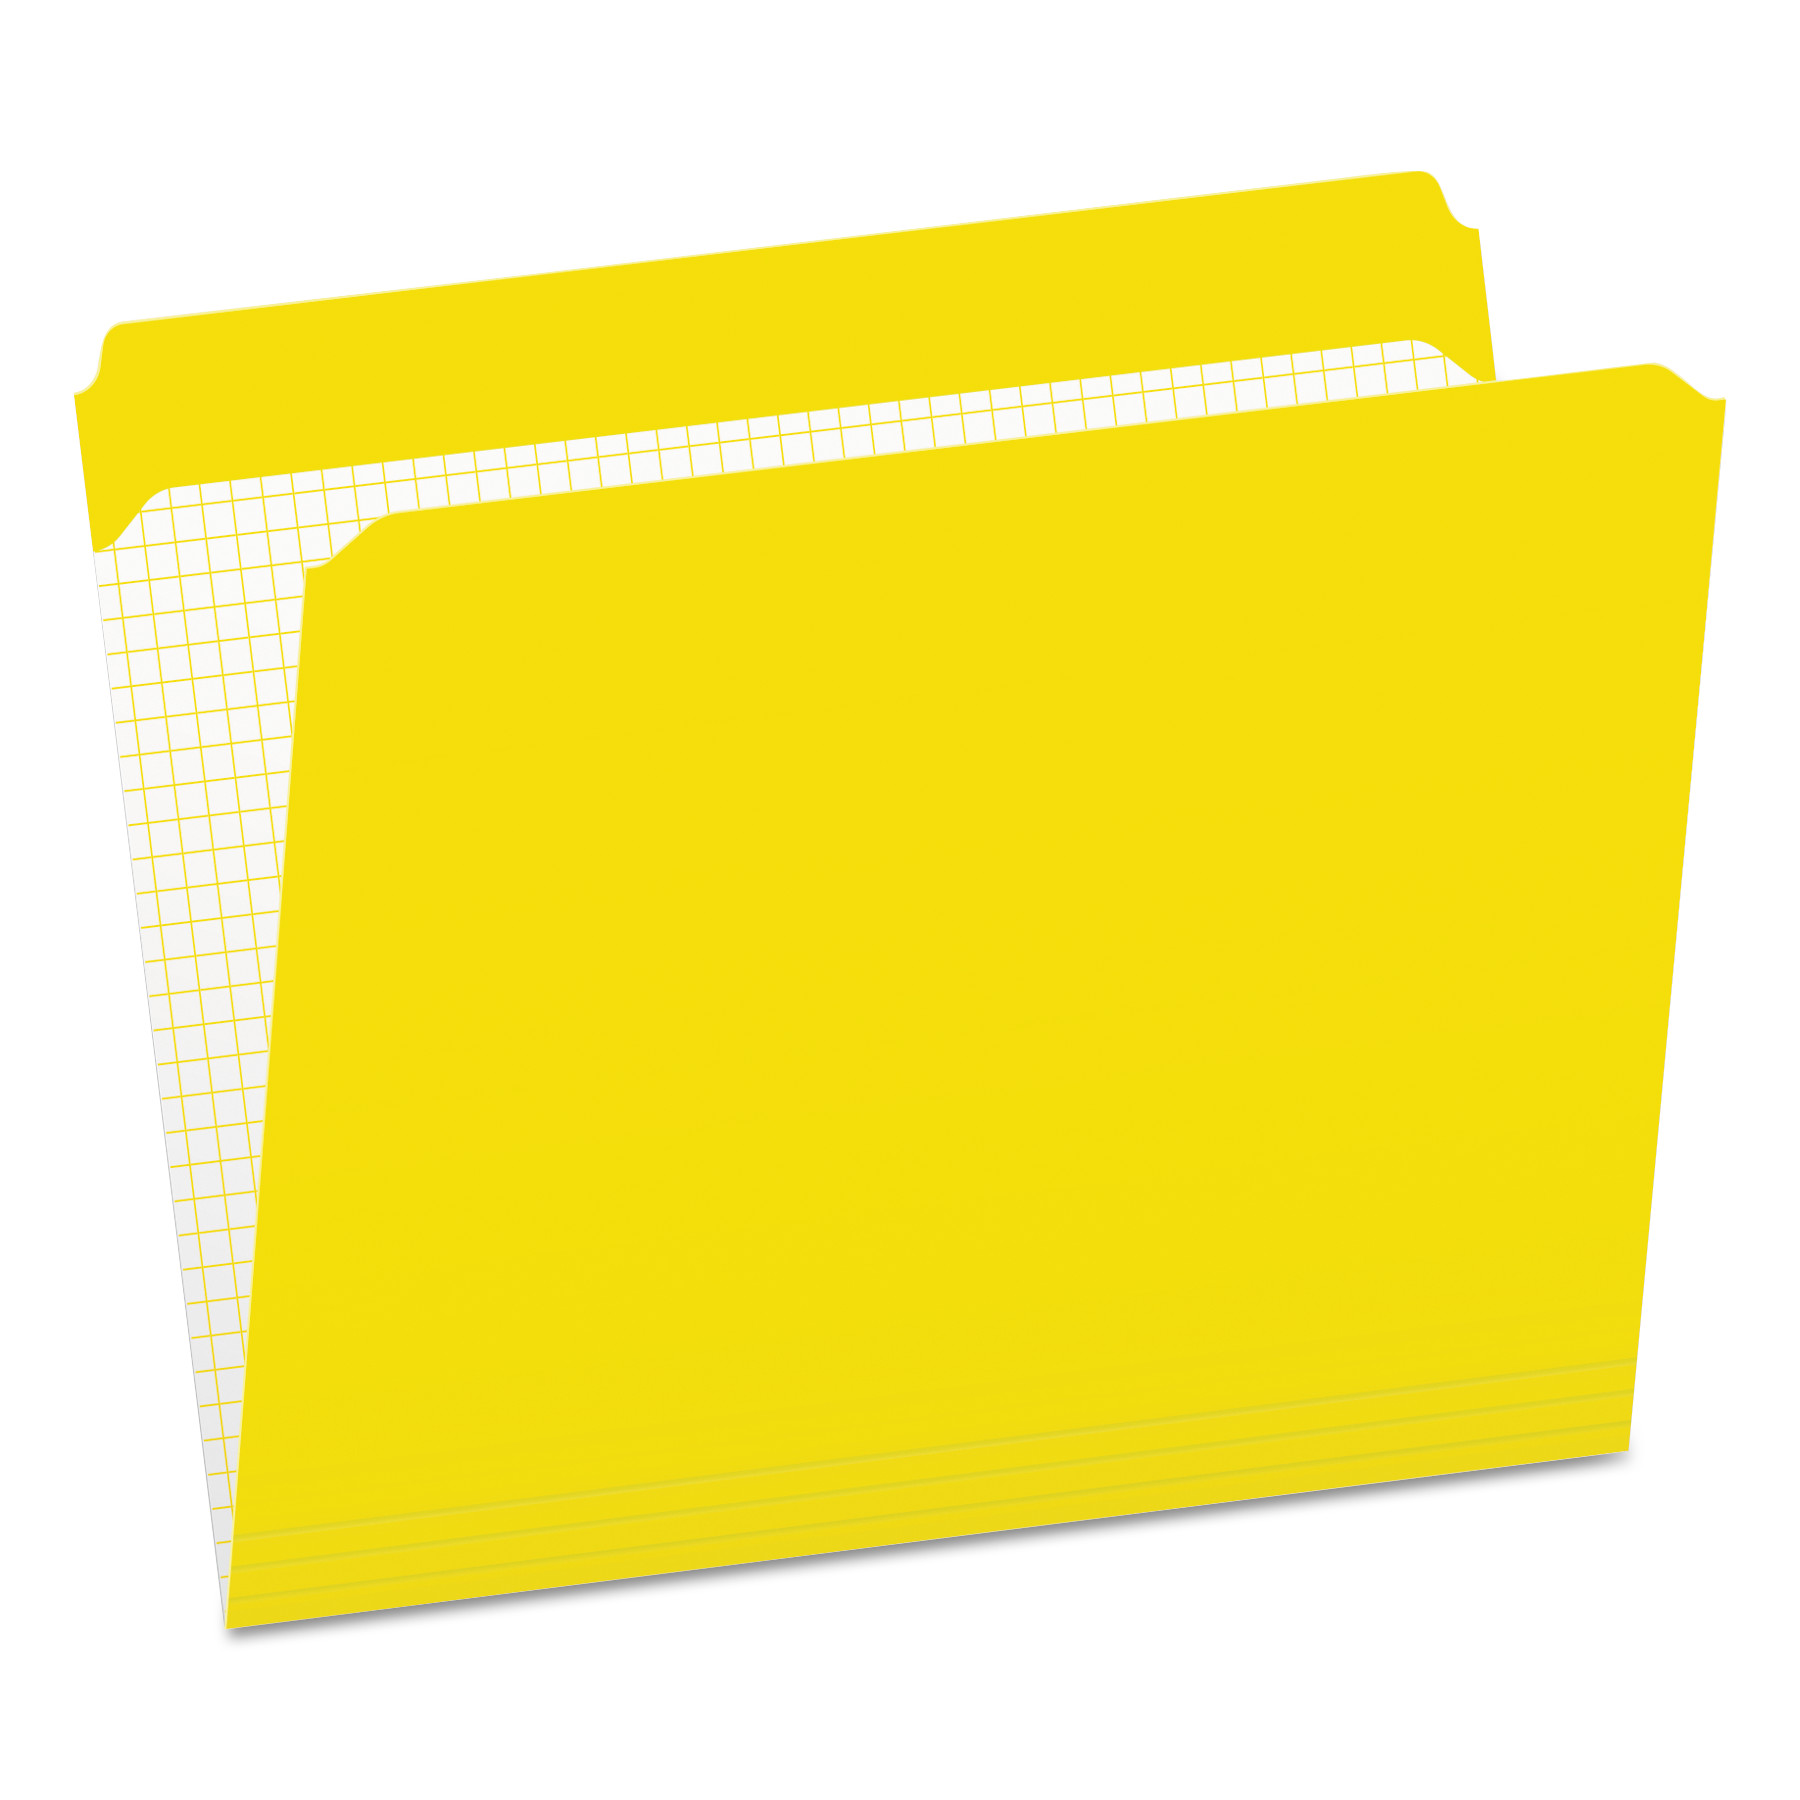  Pendaflex R152 YEL Double-Ply Reinforced Top Tab Colored File Folders, Straight Tab, Letter Size, Yellow, 100/Box (PFXR152YEL) 